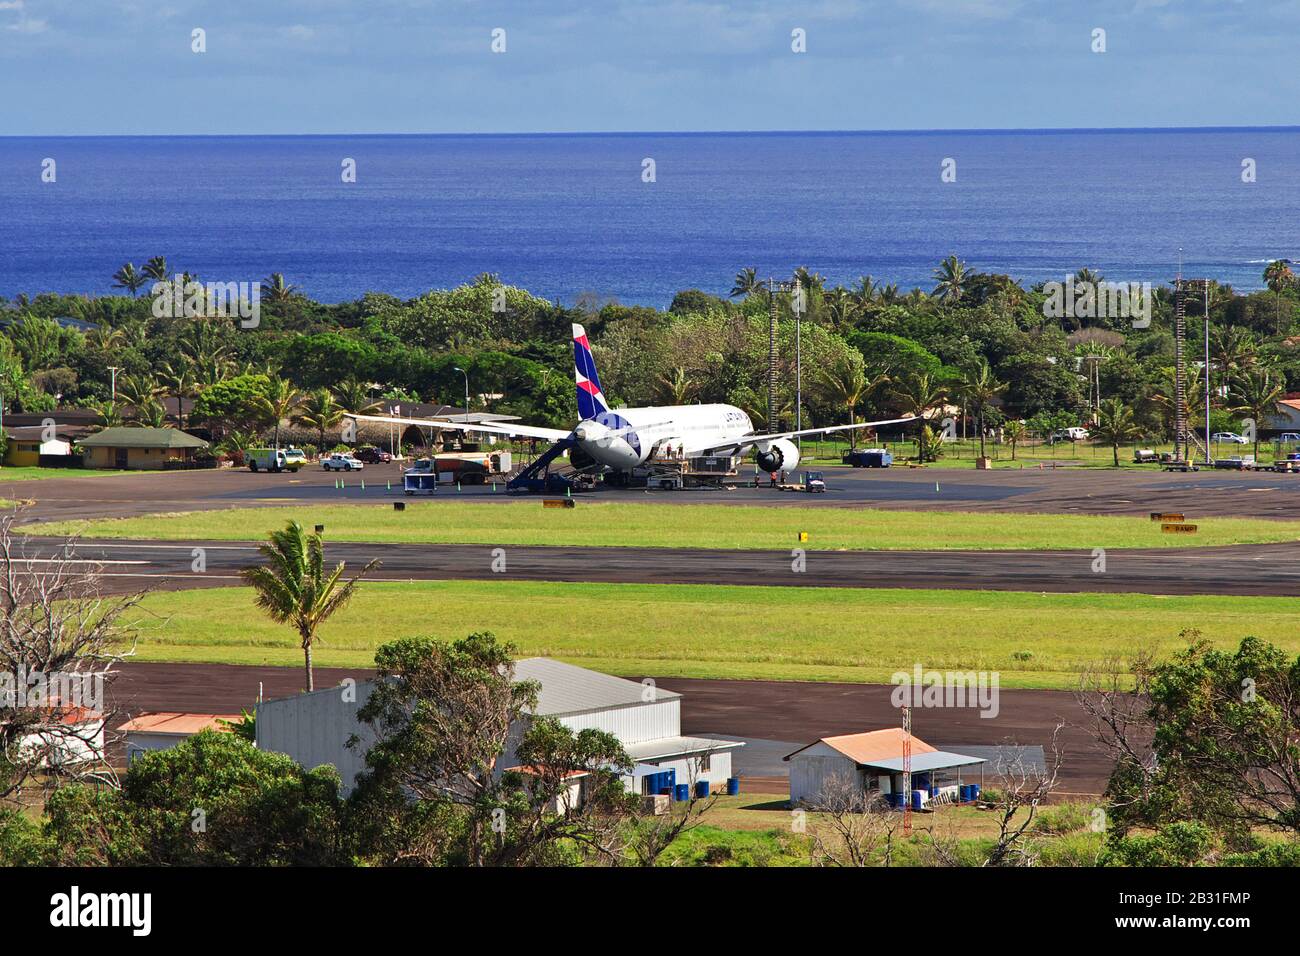 Hanga Roa, Easter Island / Chile - 28 Dec 2019: Latam airlines in the ...